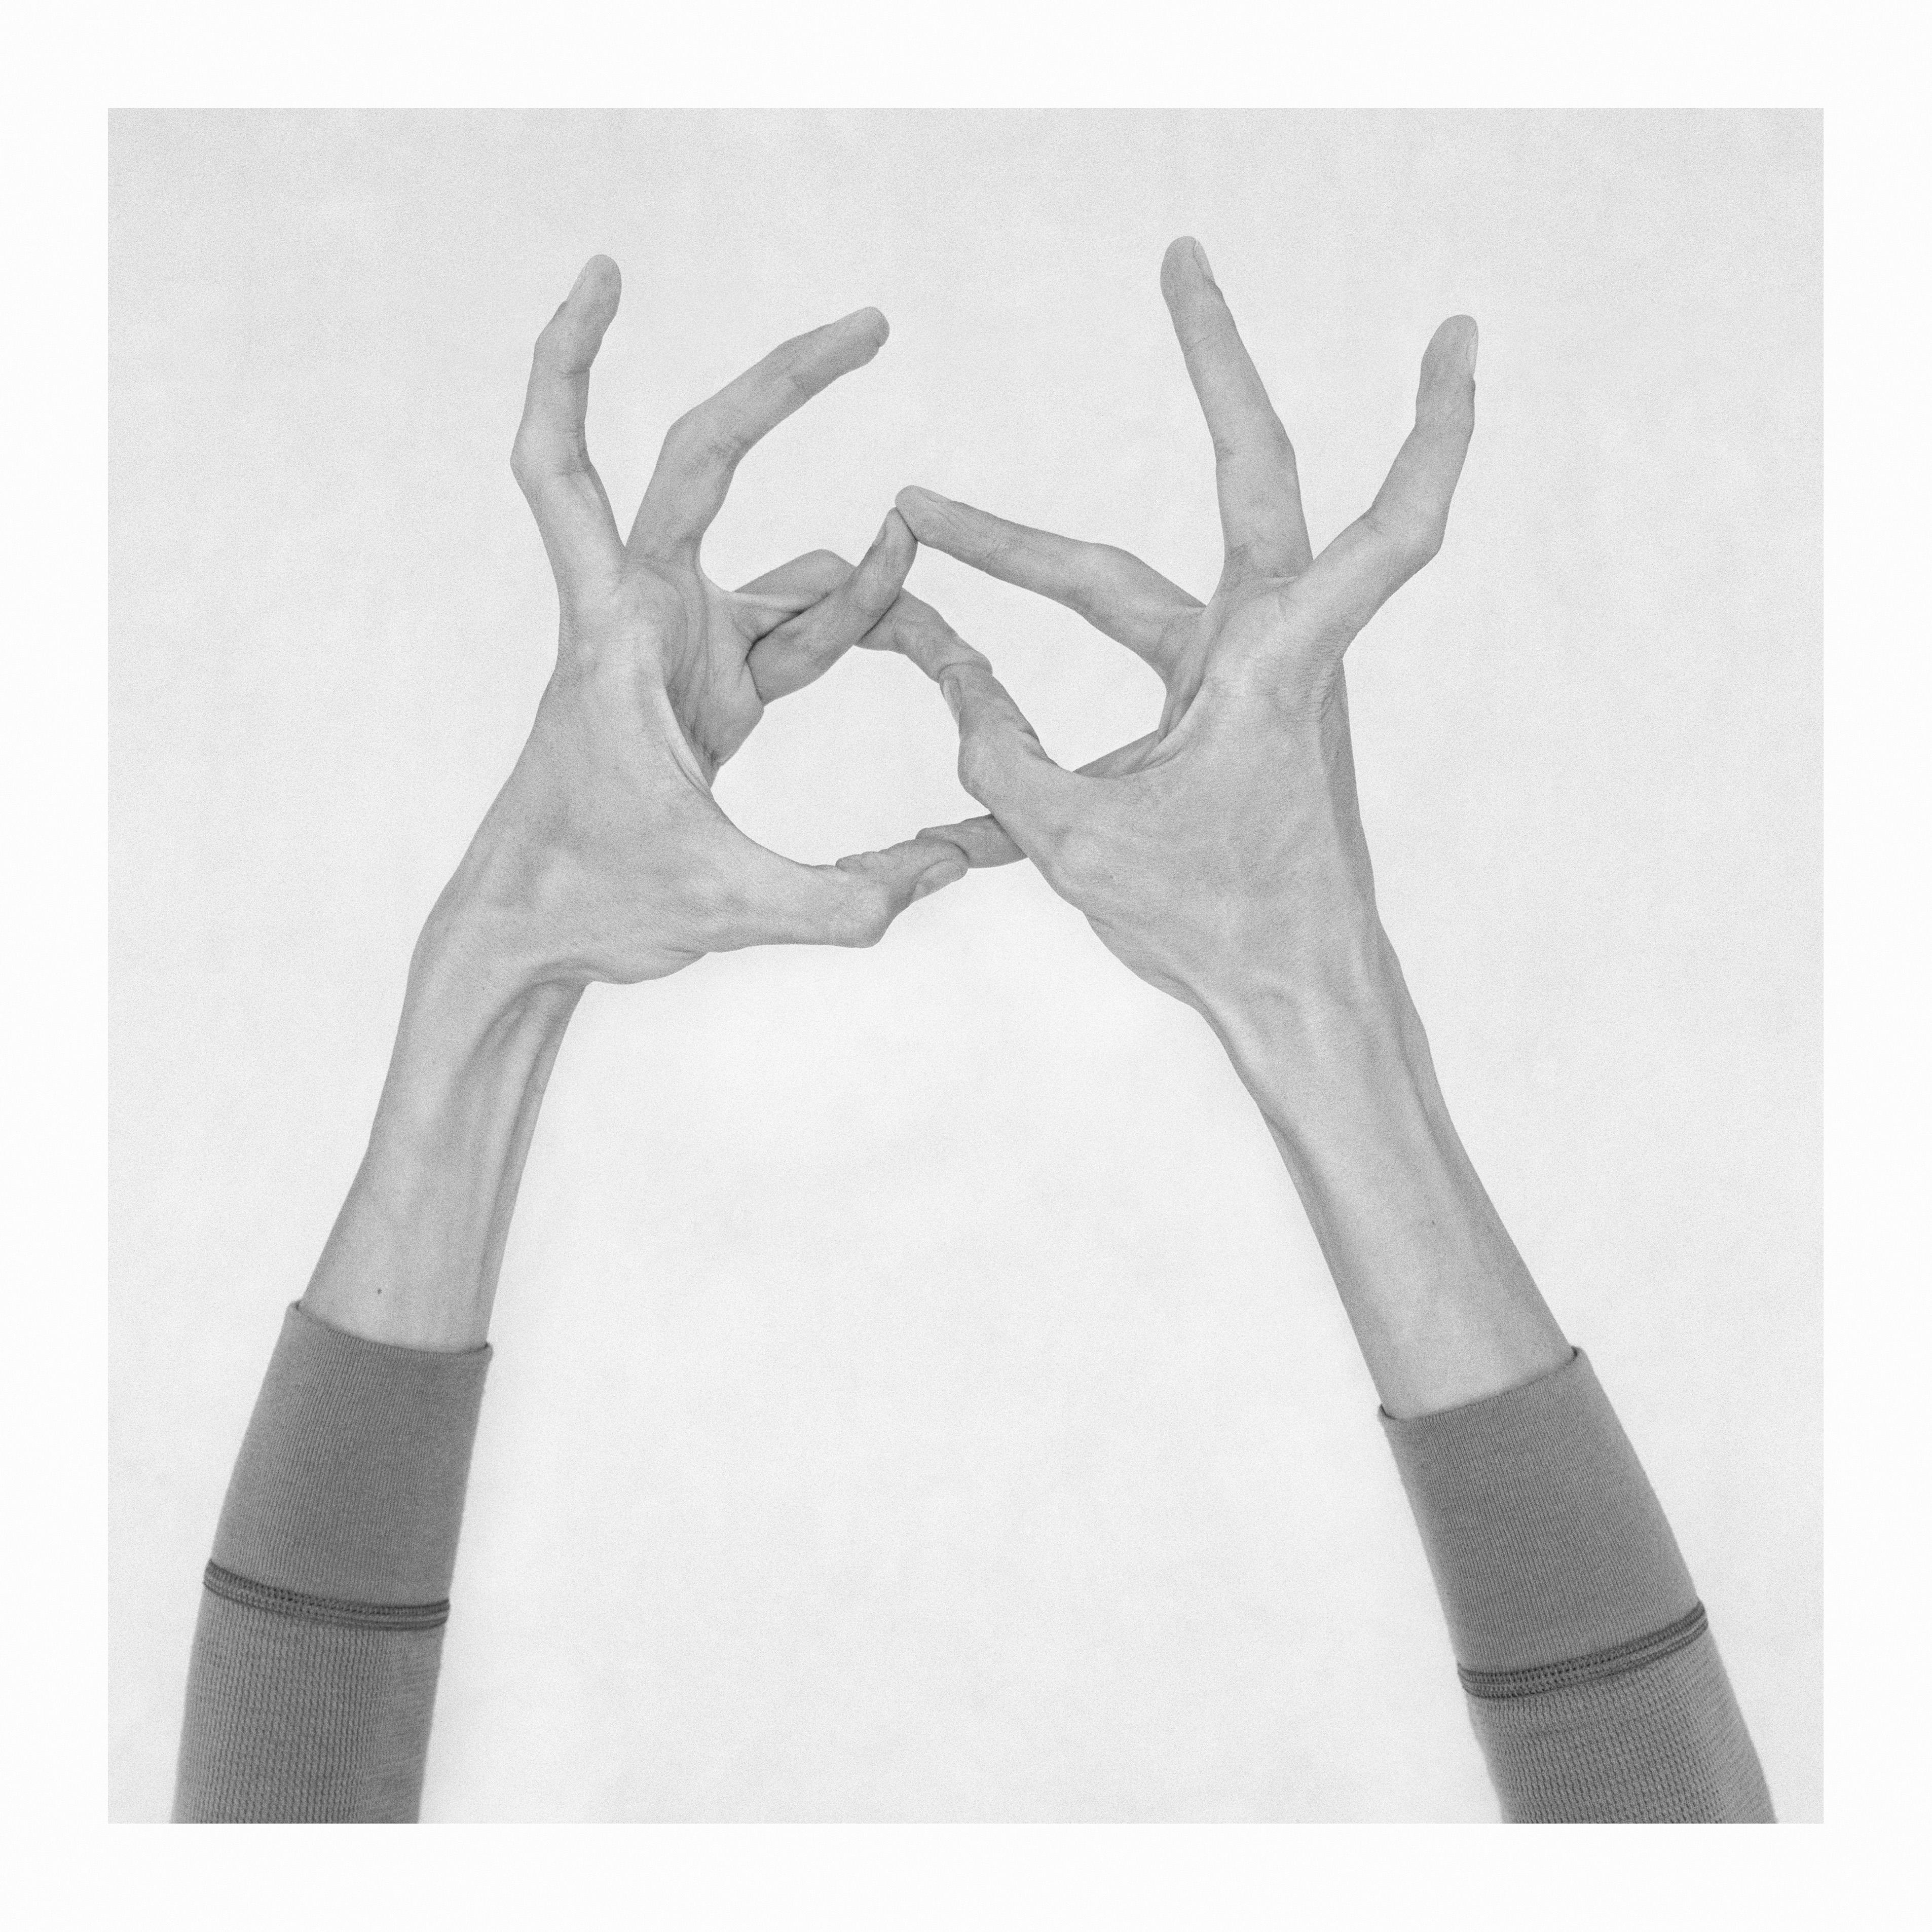 Nico Baixas / Gos-com-fuig Figurative Photograph - Untitled XXIII. From the Series Chiromorphose. Hands. Black & White Photography